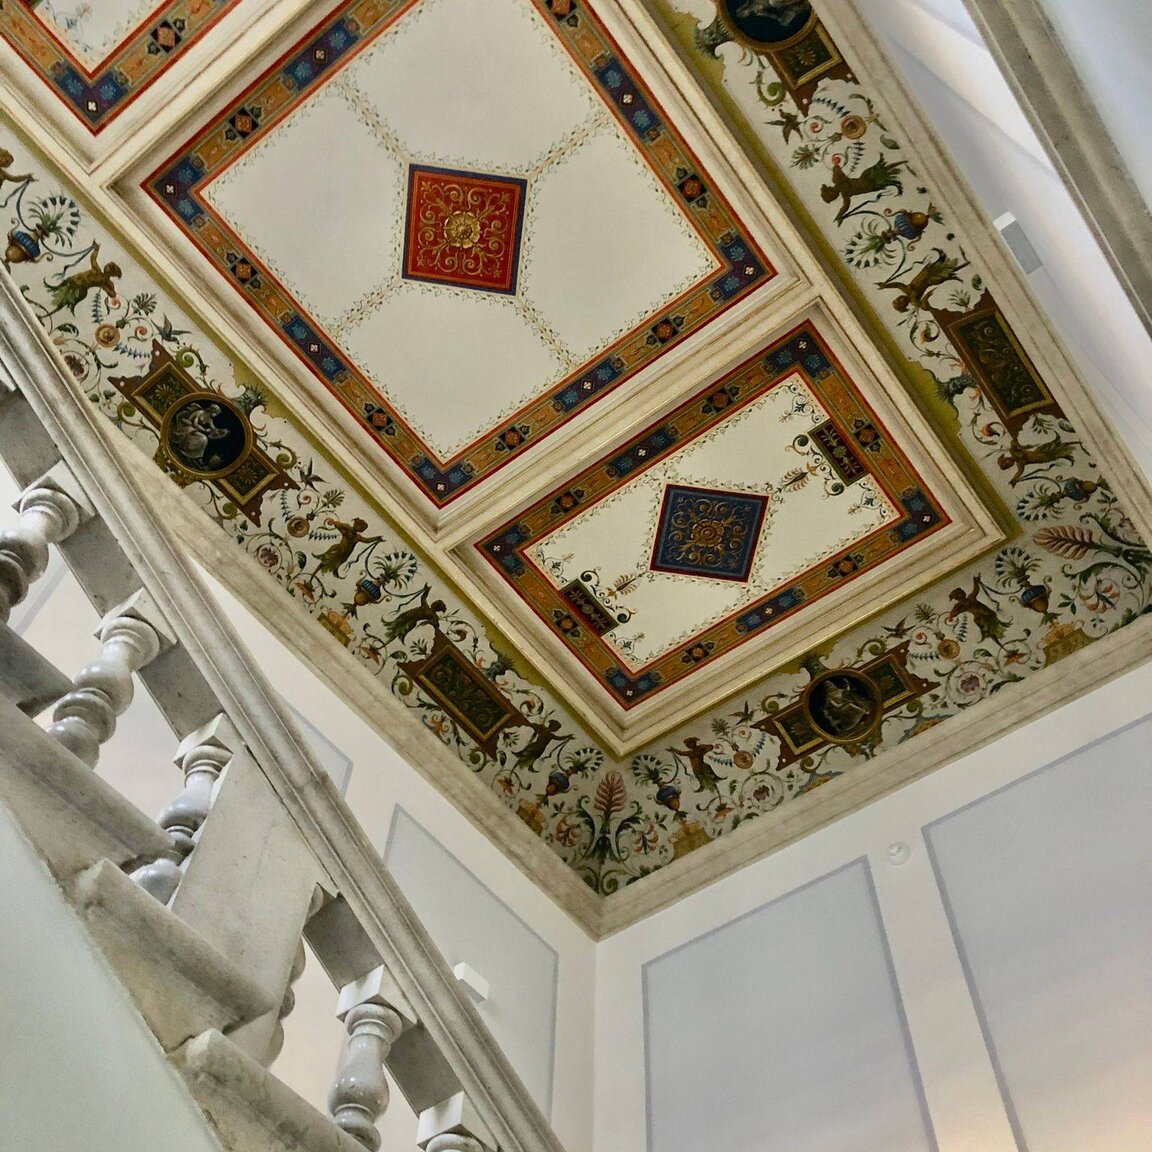 The ceiling of the palace